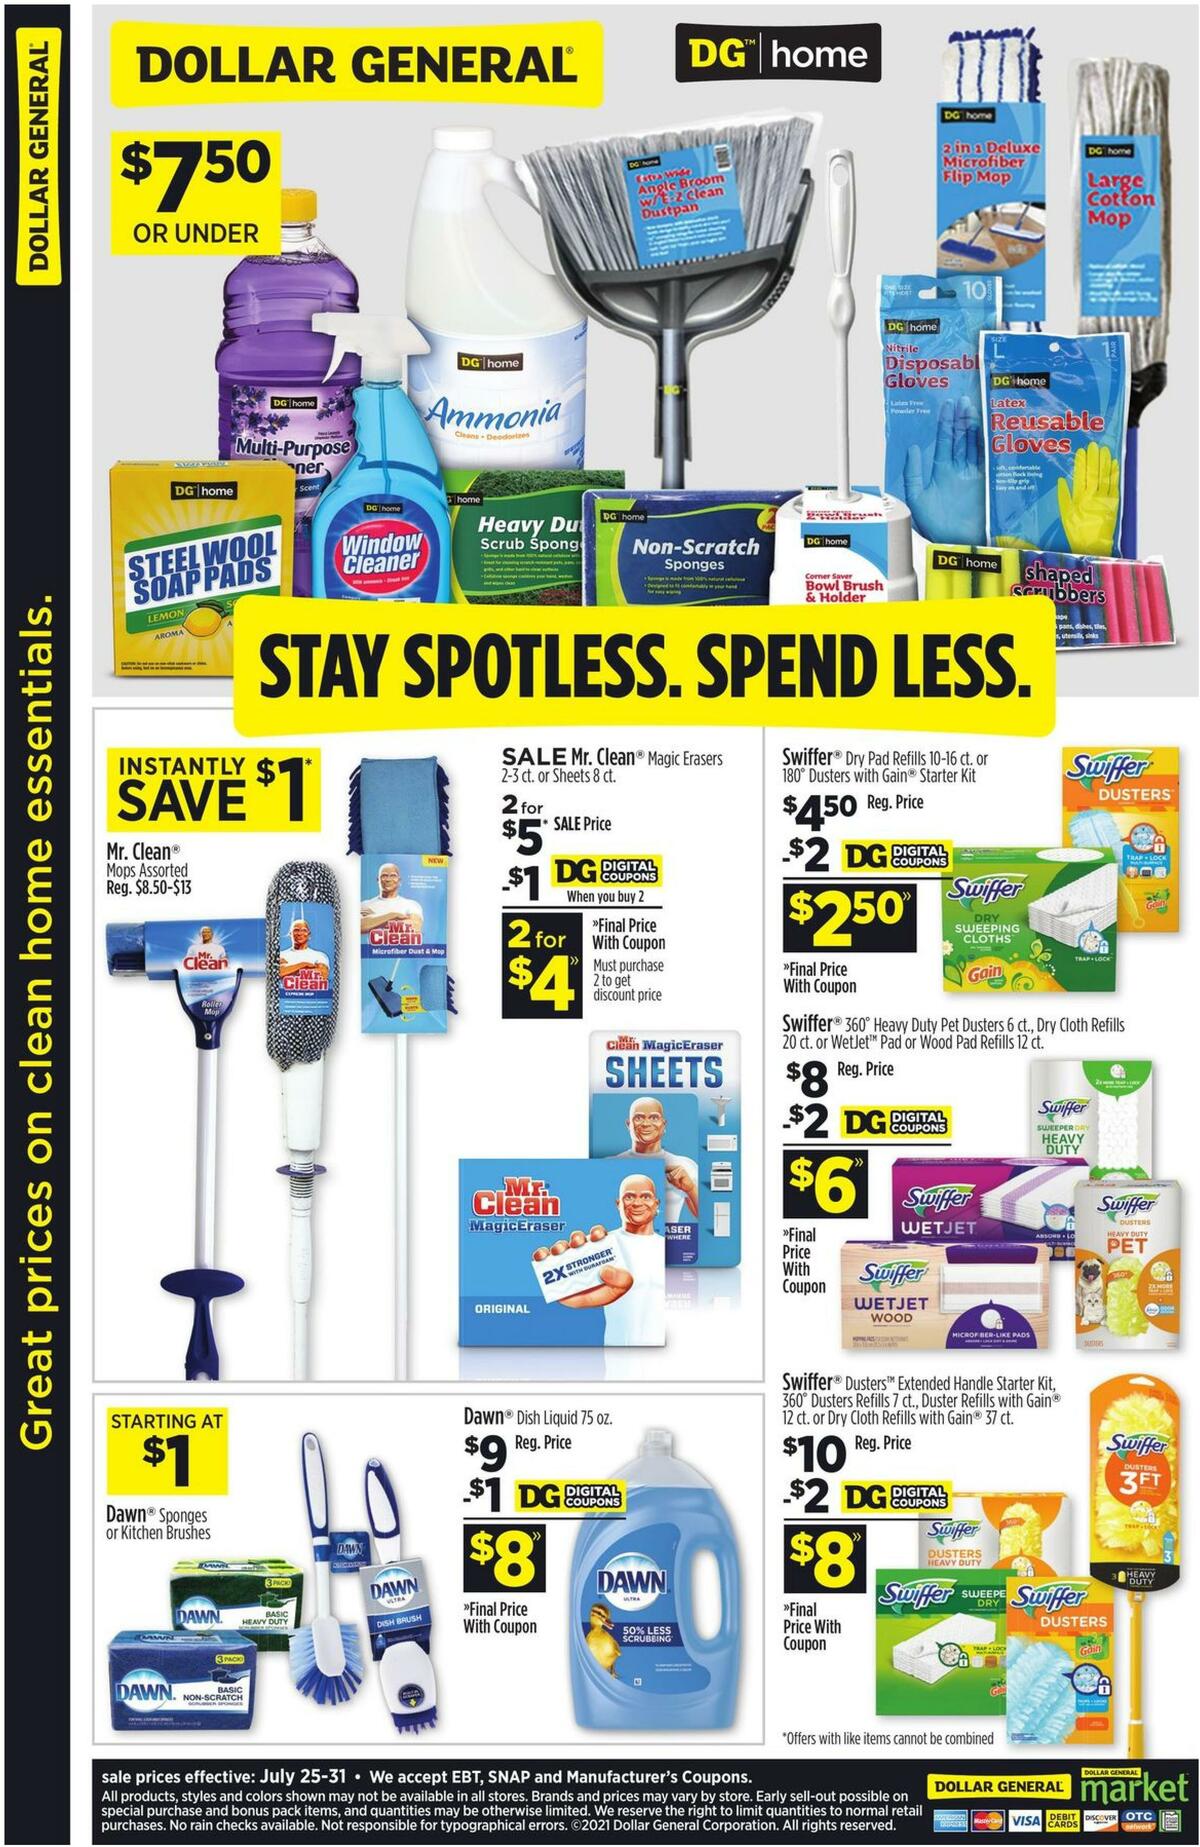 Dollar General Great prices on clean home essentials Weekly Ad from July 25